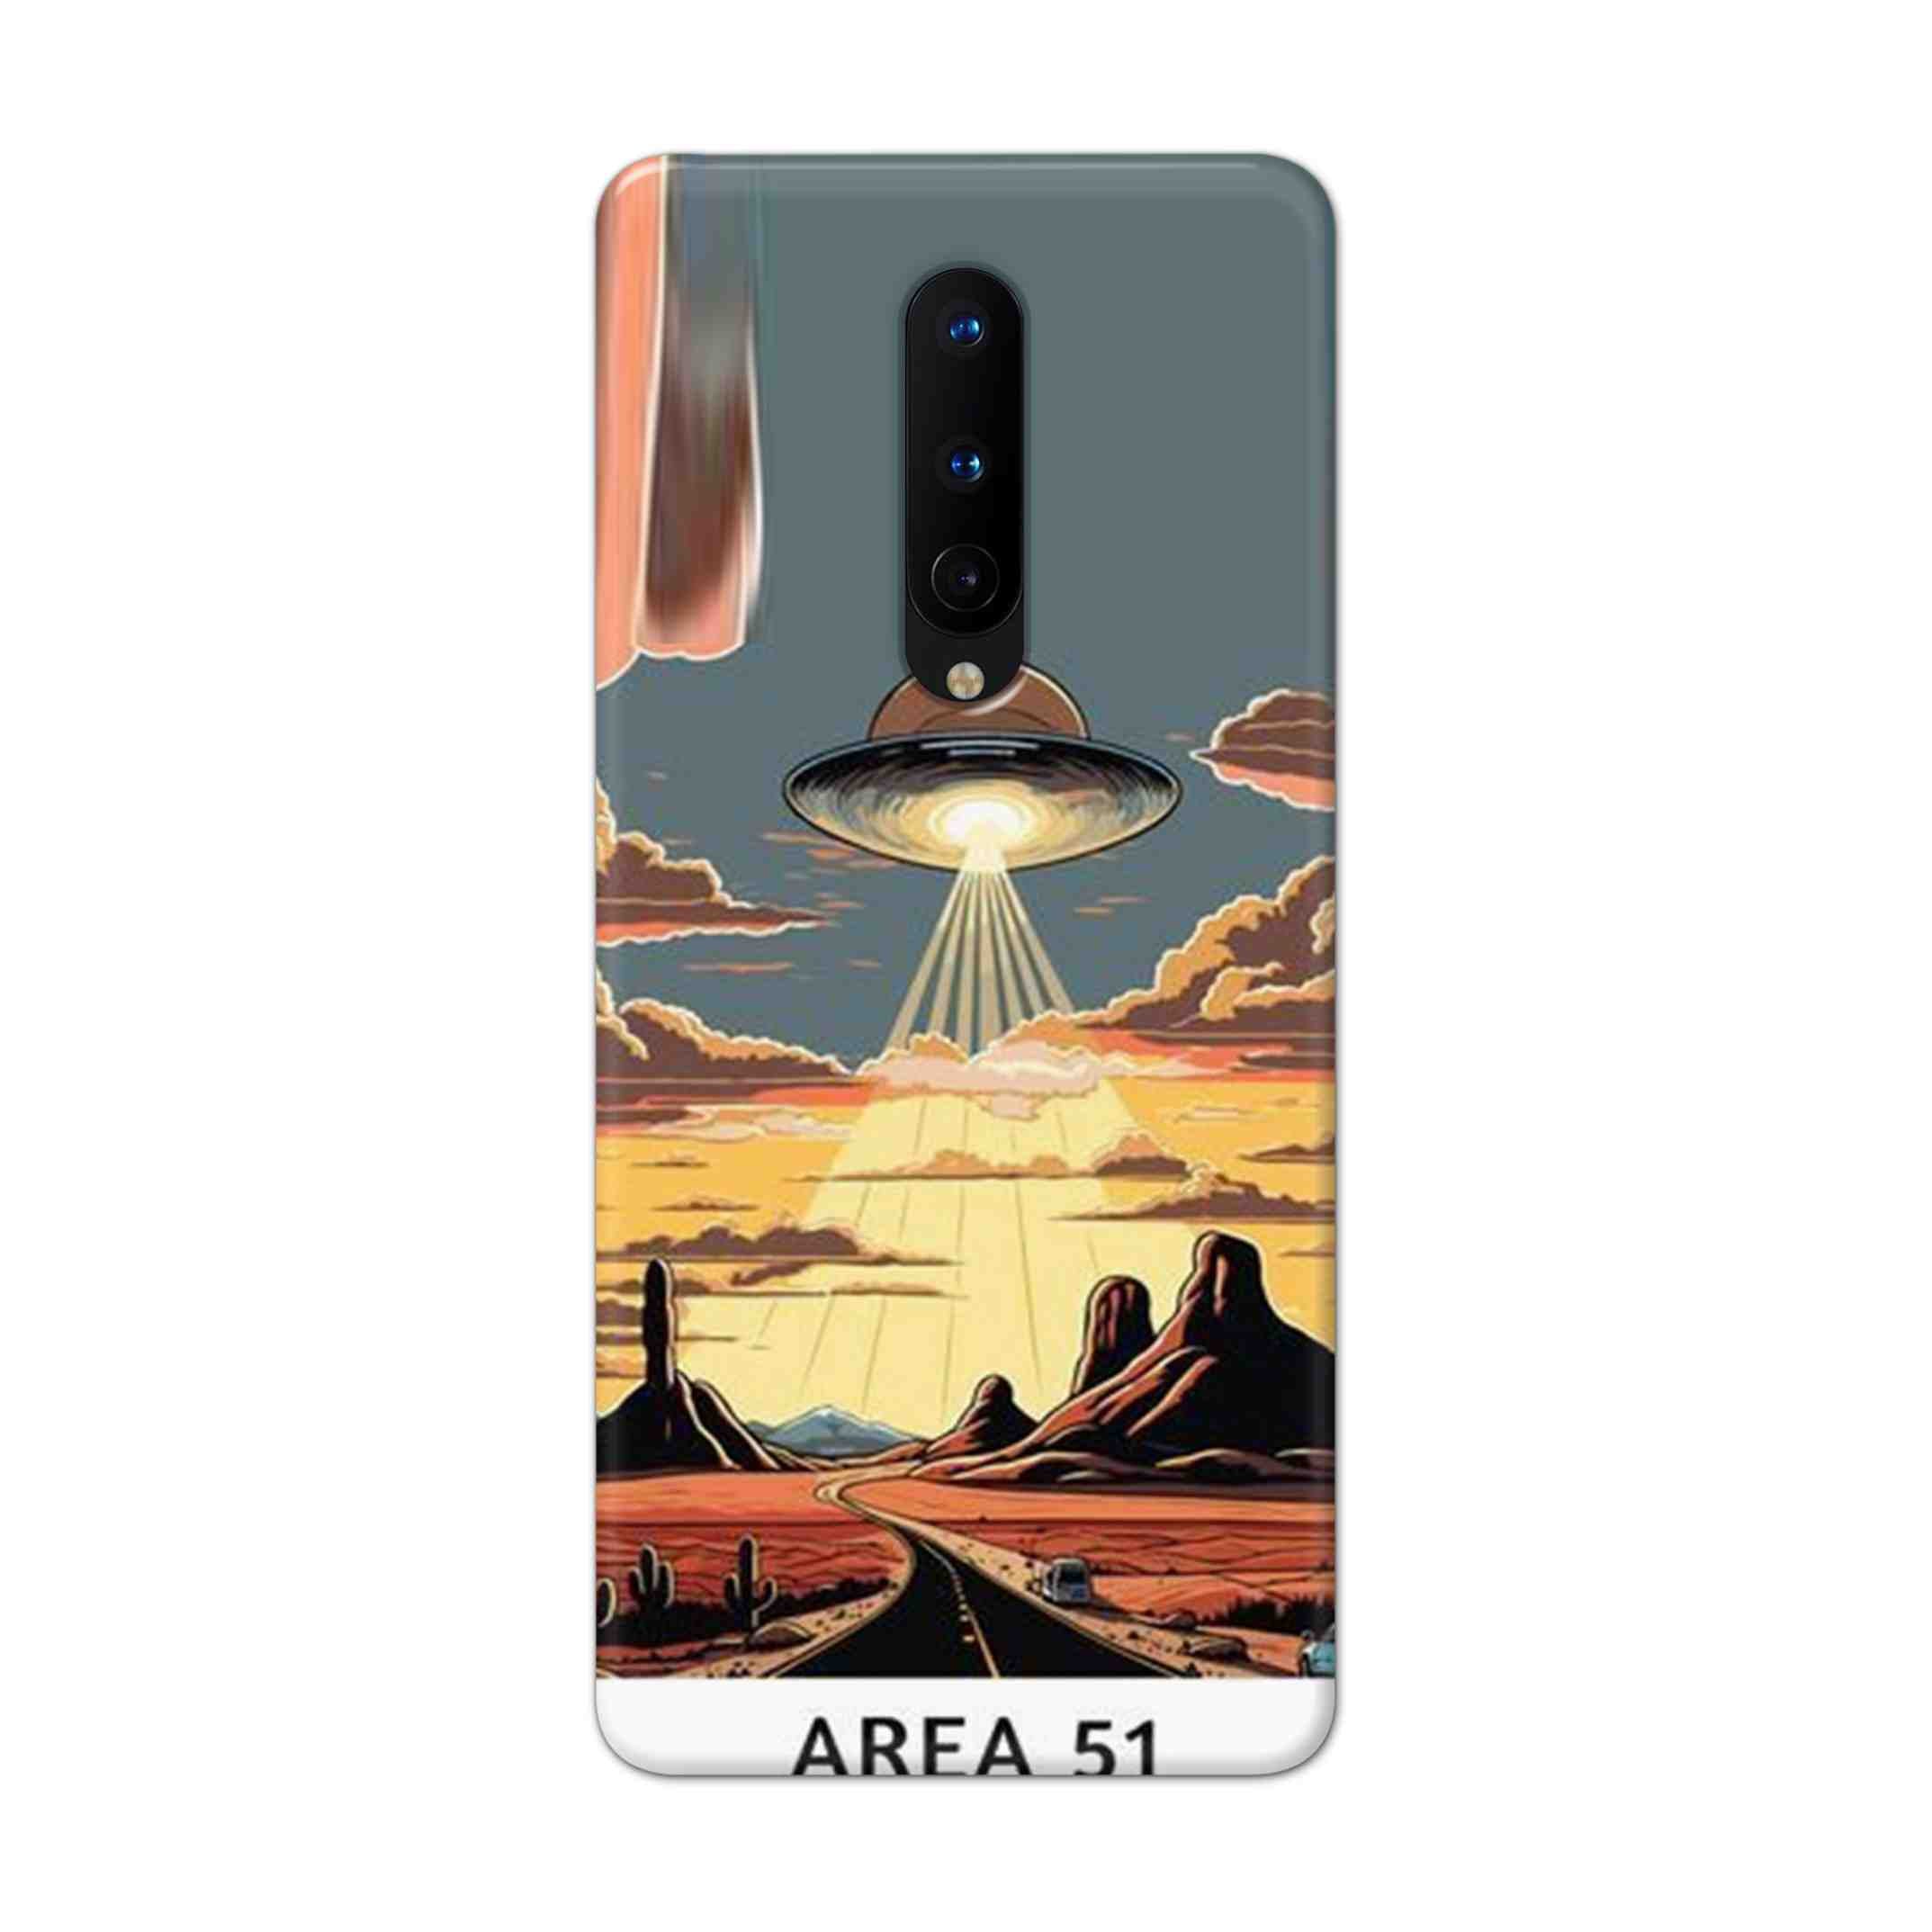 Buy Area 51 Hard Back Mobile Phone Case Cover For OnePlus 8 Online